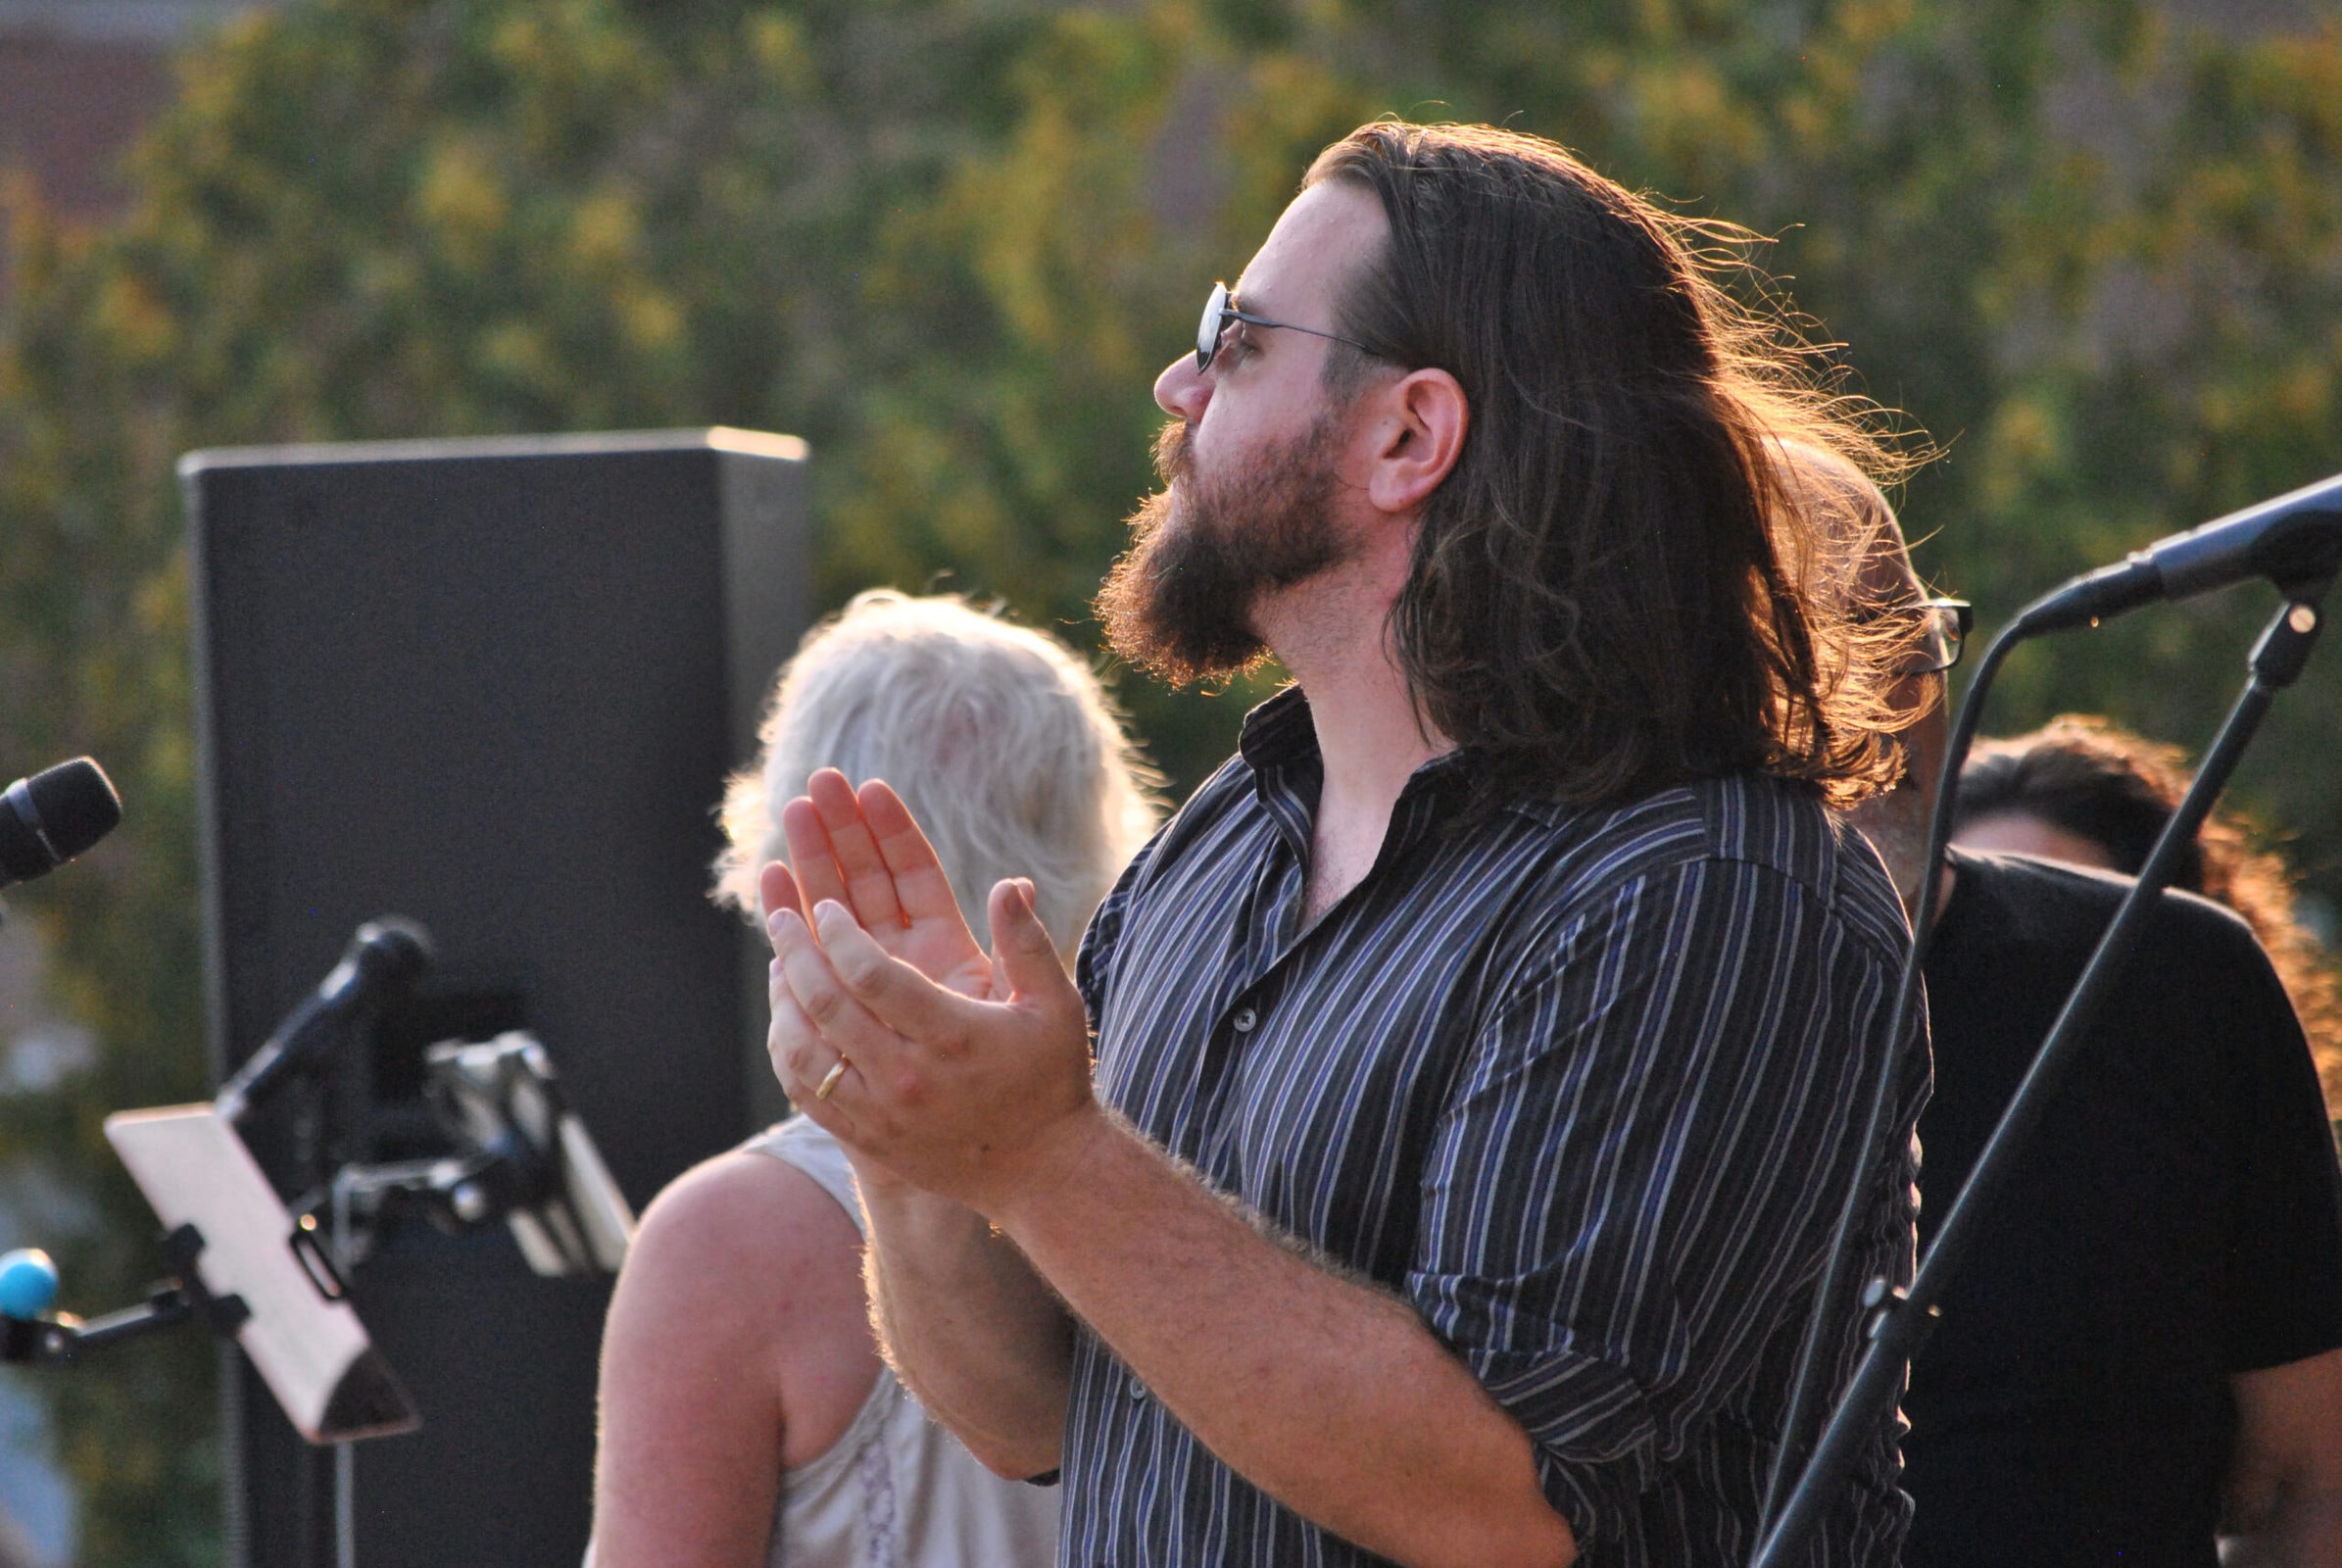 Andy Coyle claps during his band’s performance.